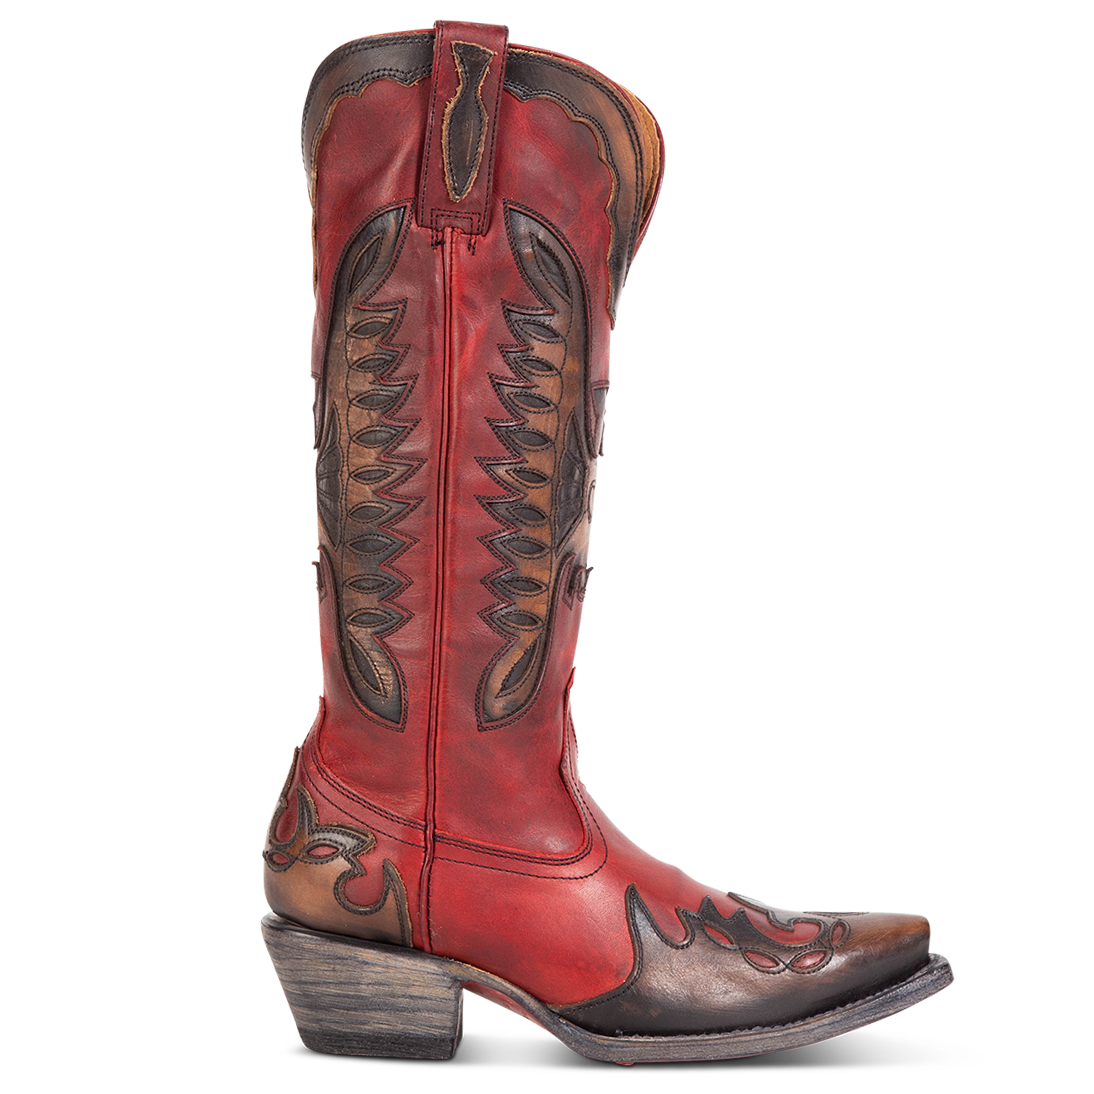 FREEBIRD women's Willie red multi leather western boot with textured design, stitch detailing, and snip toe construction